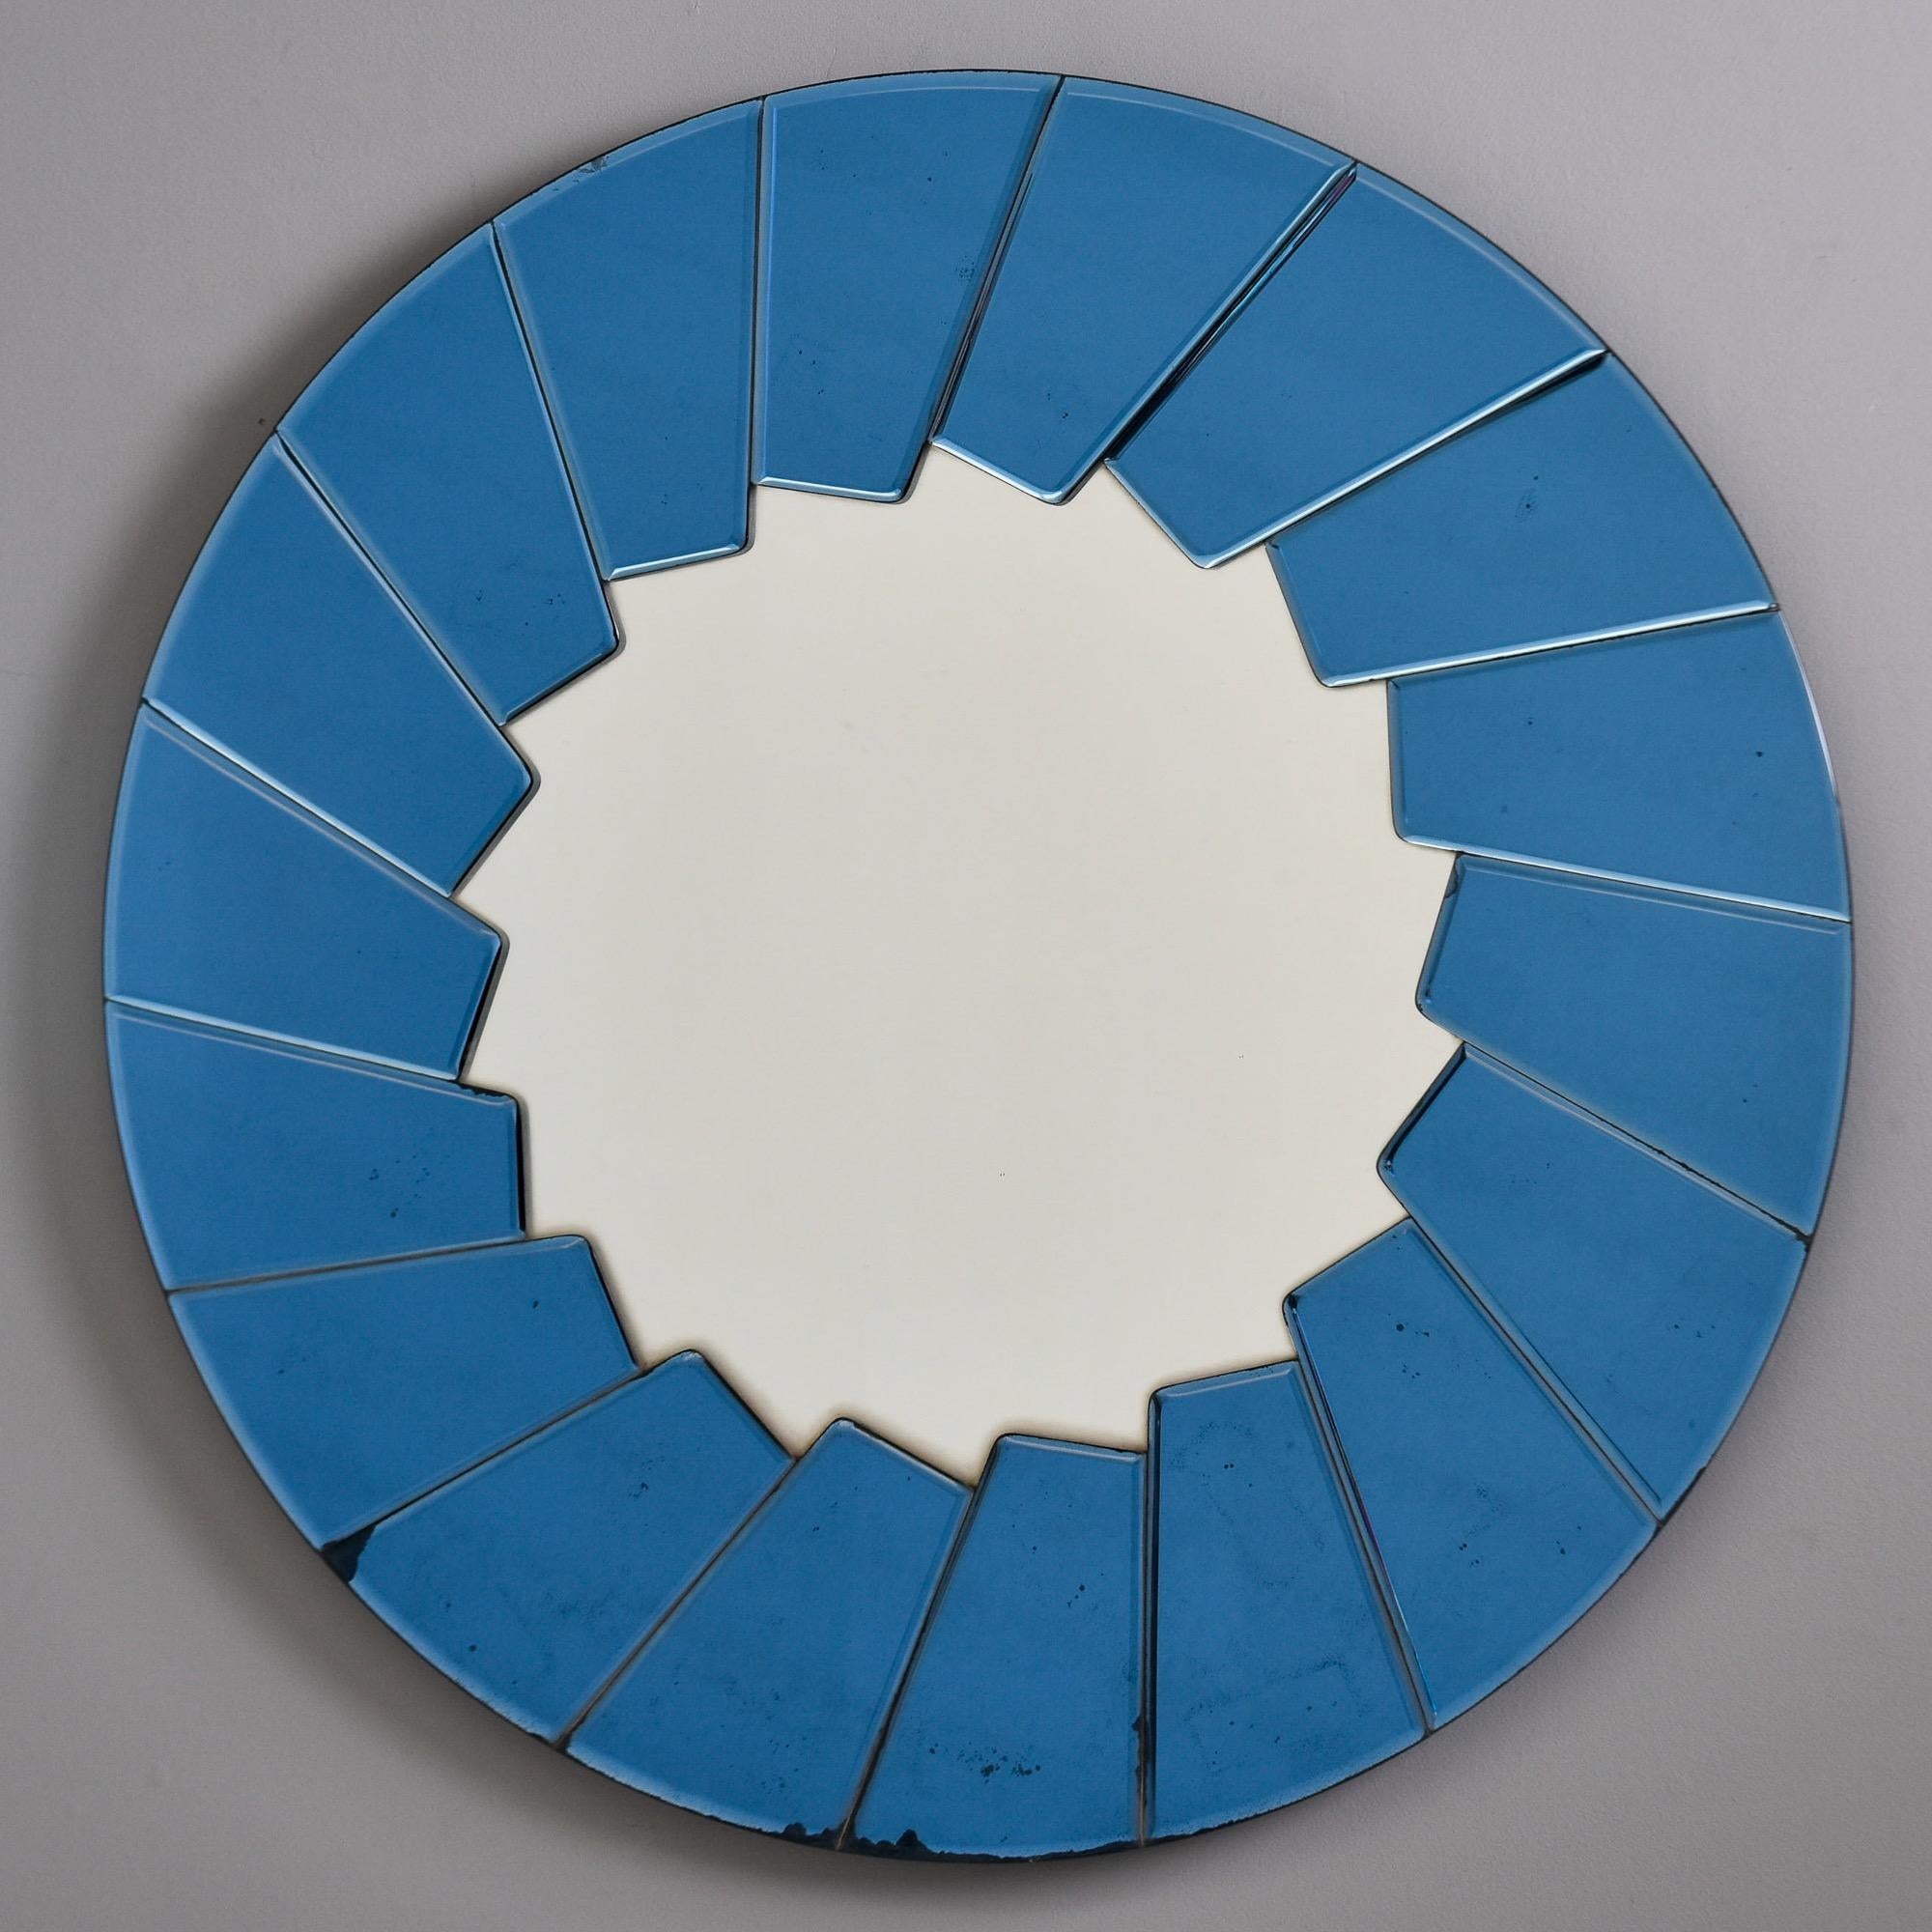 Italian Modernist Round Mirror with Blue Mirrored Edging In Good Condition For Sale In Troy, MI